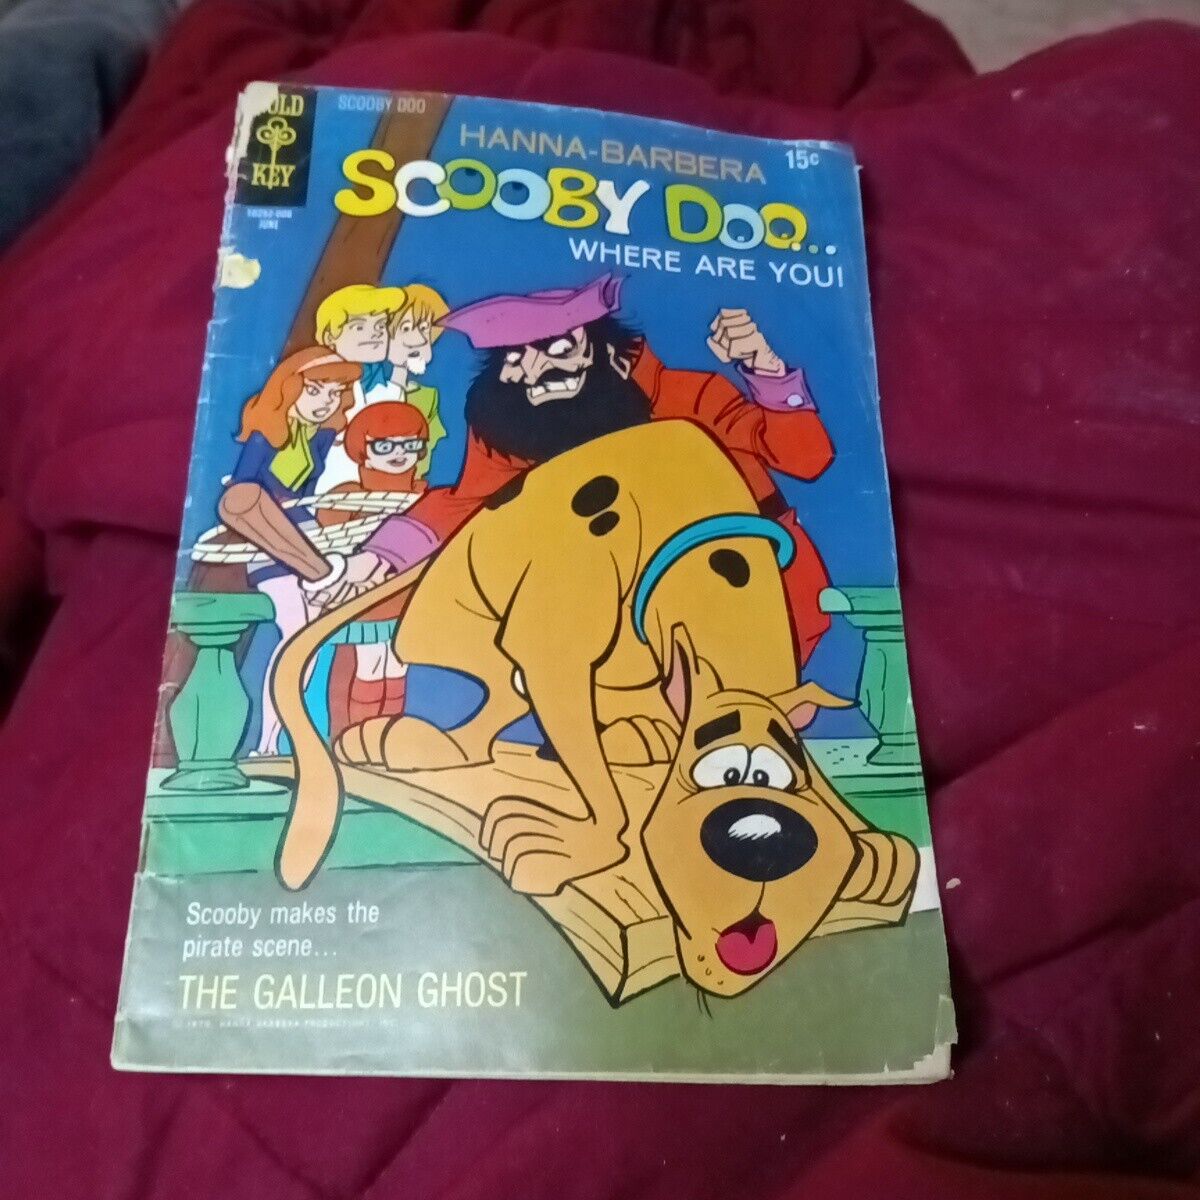 Scooby Doo #2 Gold Key 1970 Where Are You Hanna Barbera Comics The Galleon Ghost